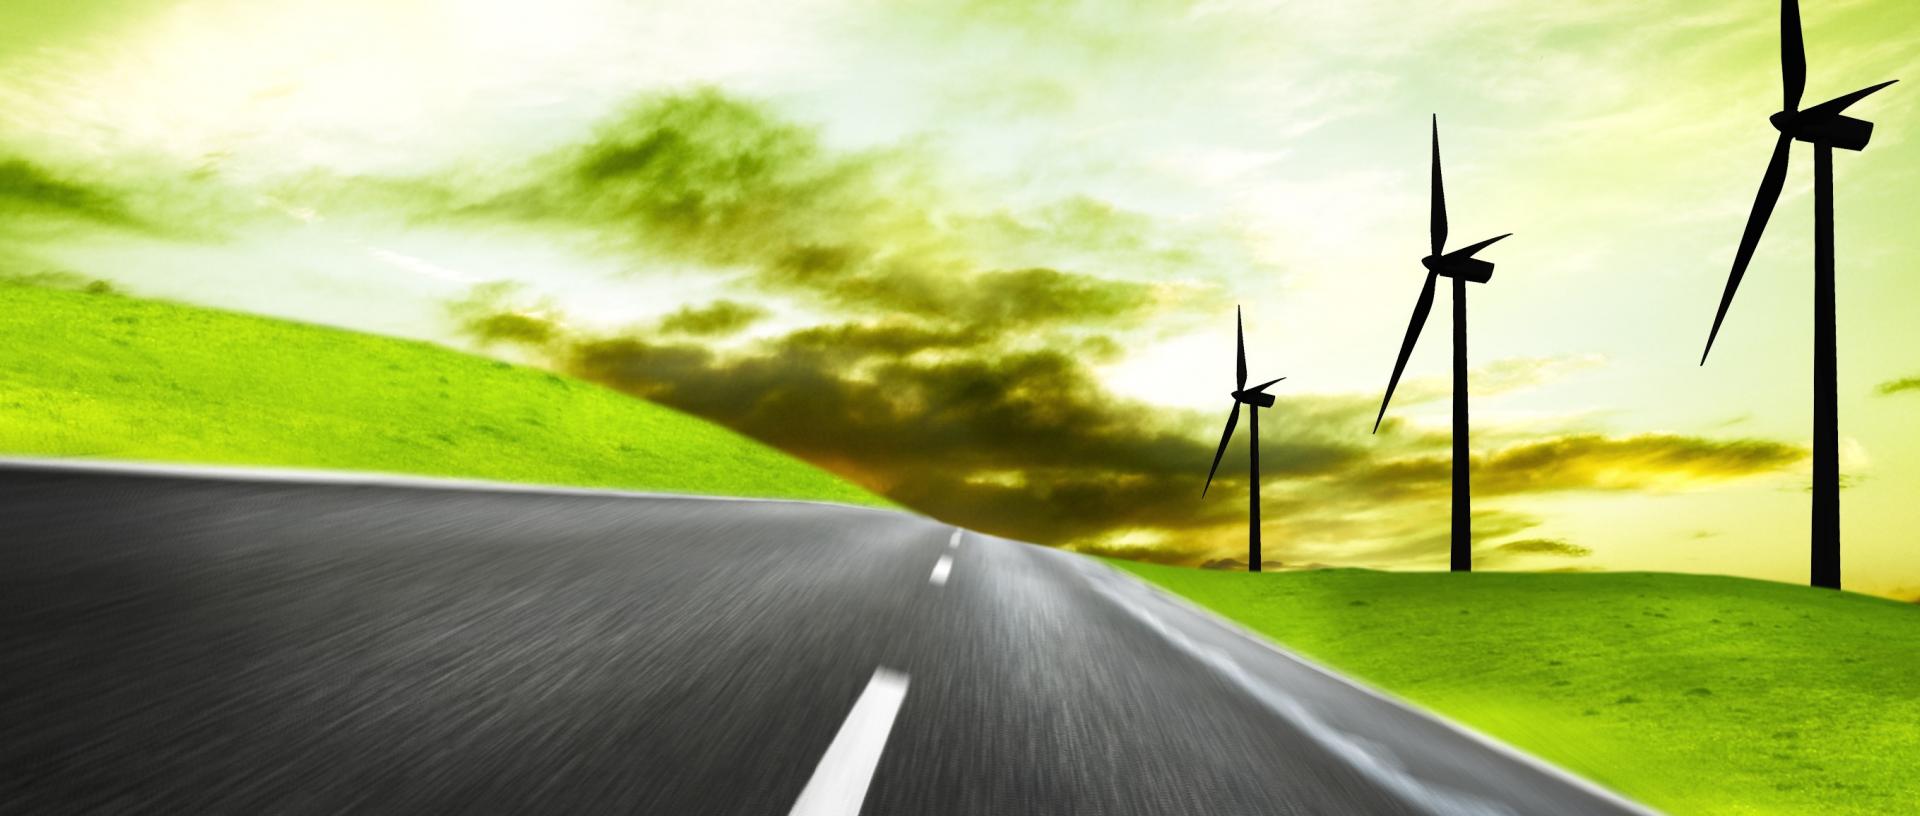 Futuristic picture depicting a road winding the countryside with wind turbines and a green sky